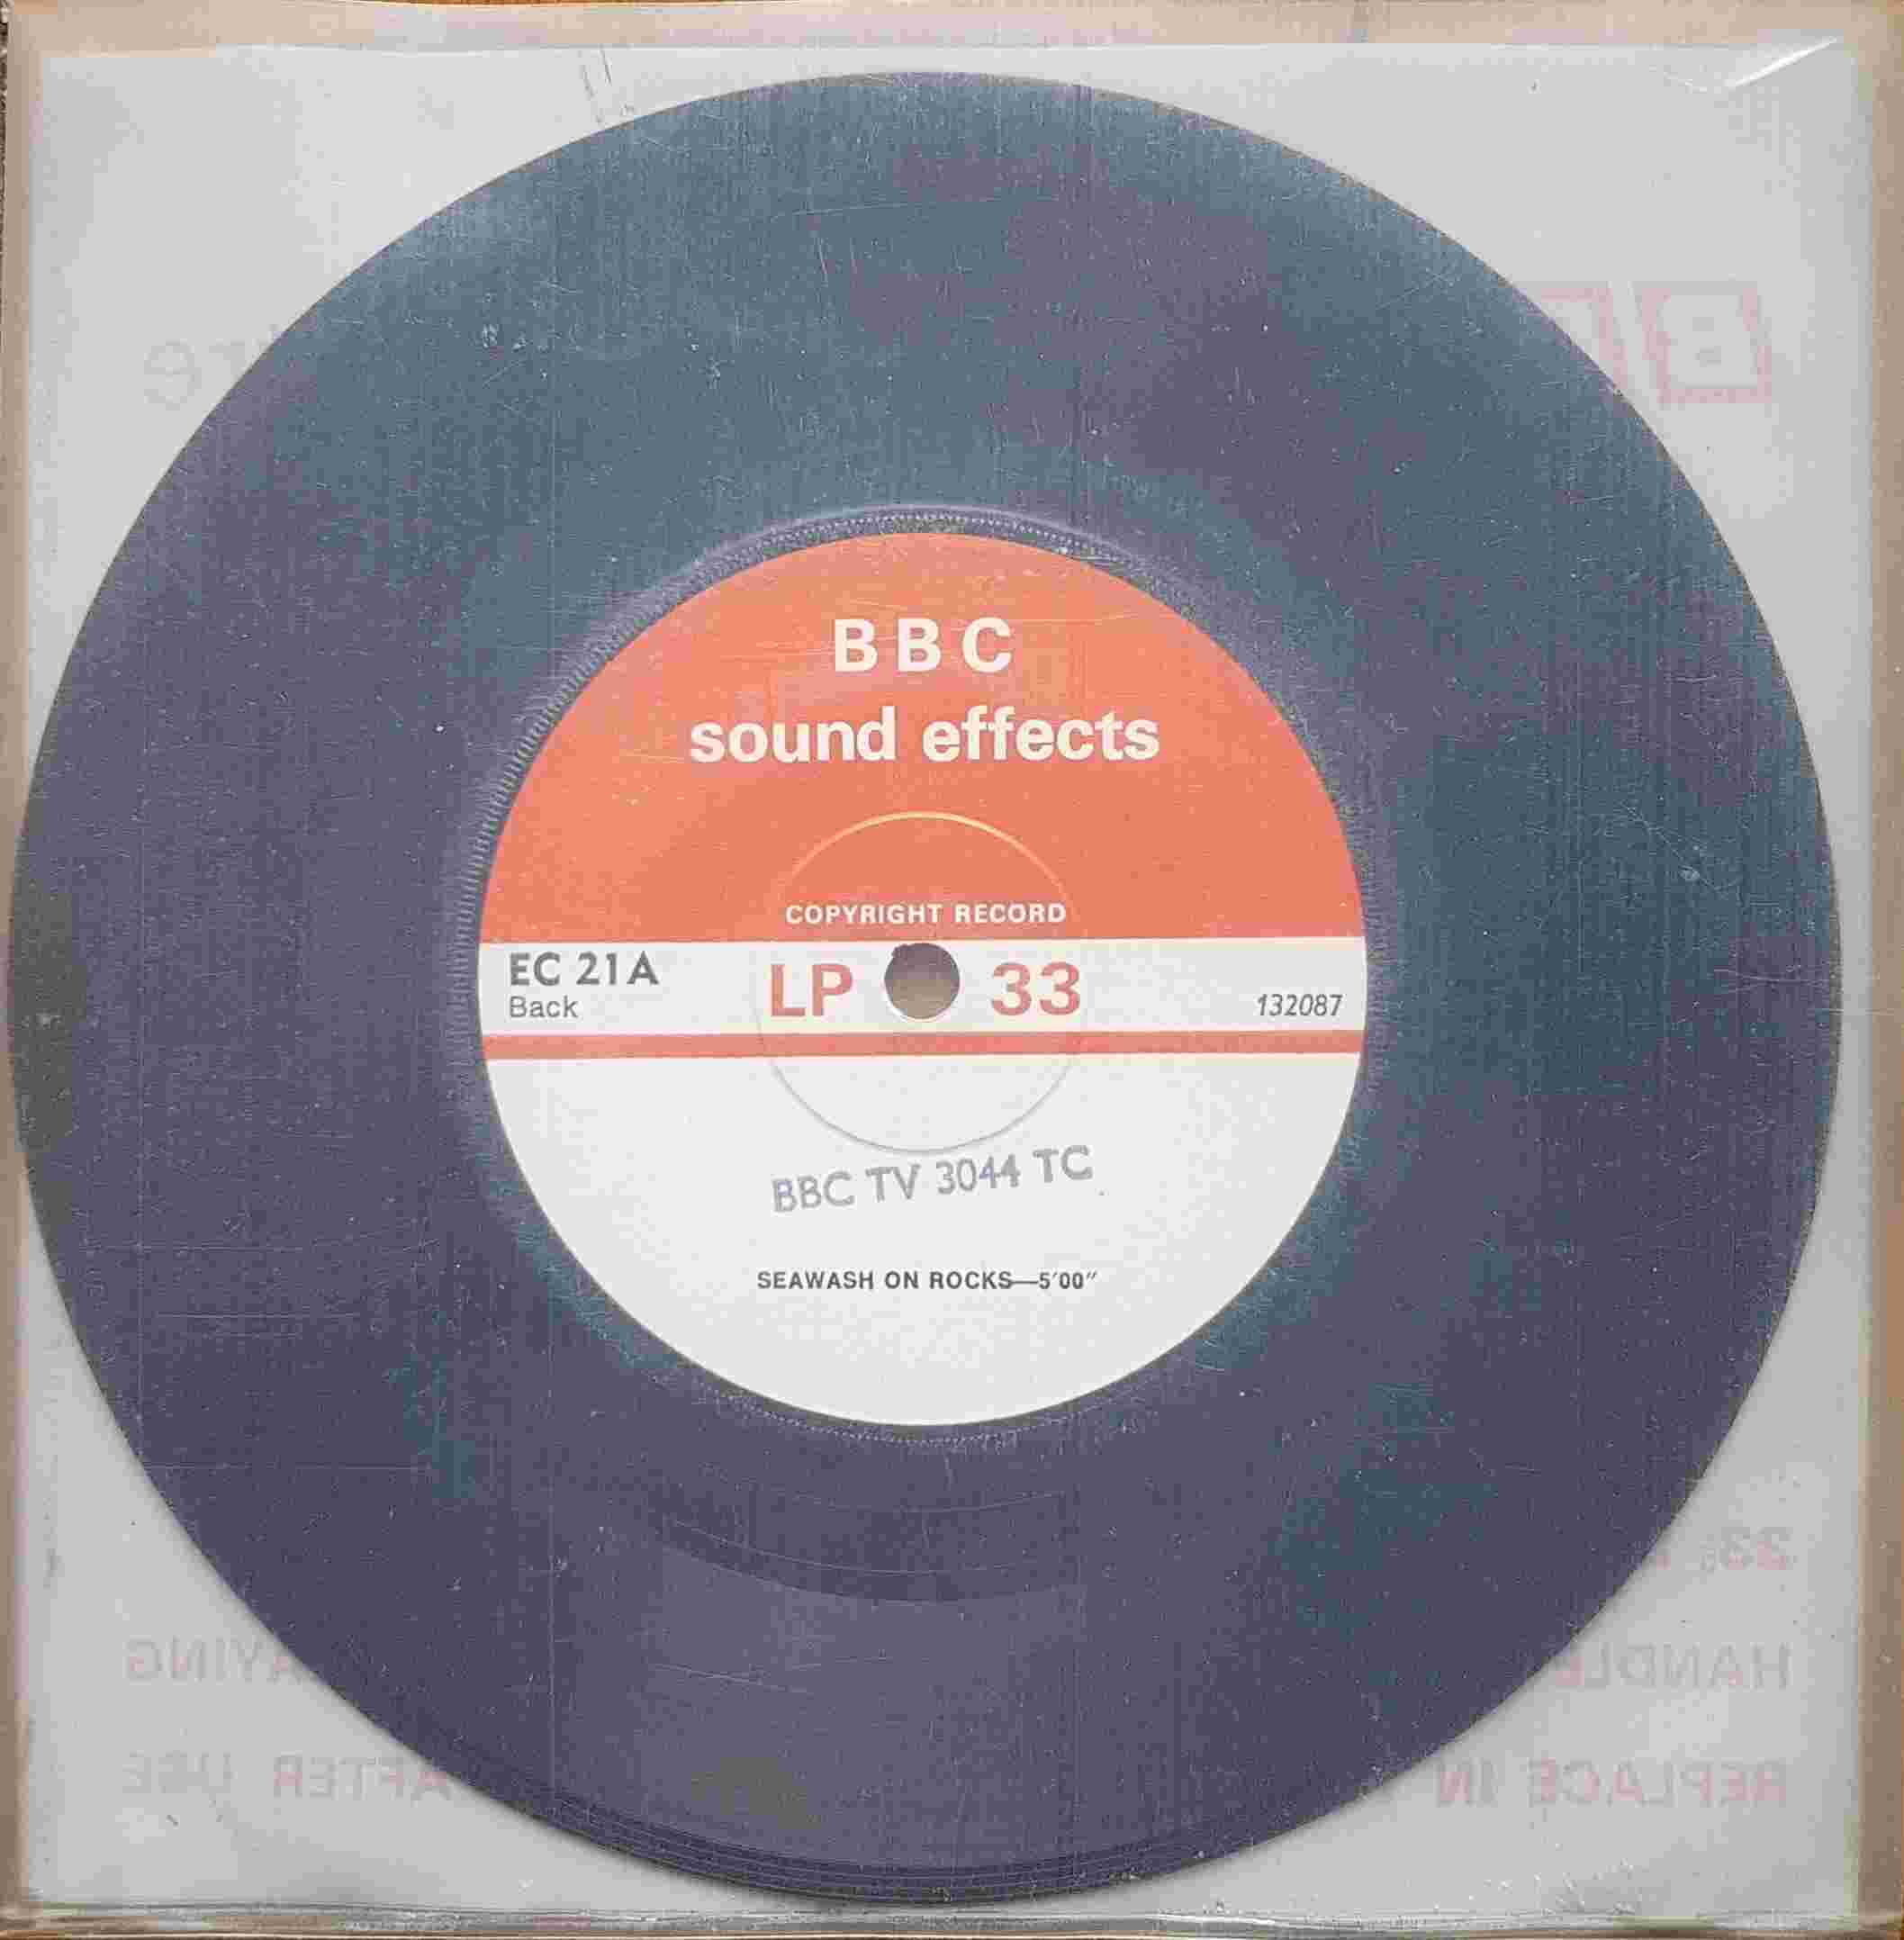 Picture of EC 21A Seawash by artist Not registered from the BBC records and Tapes library